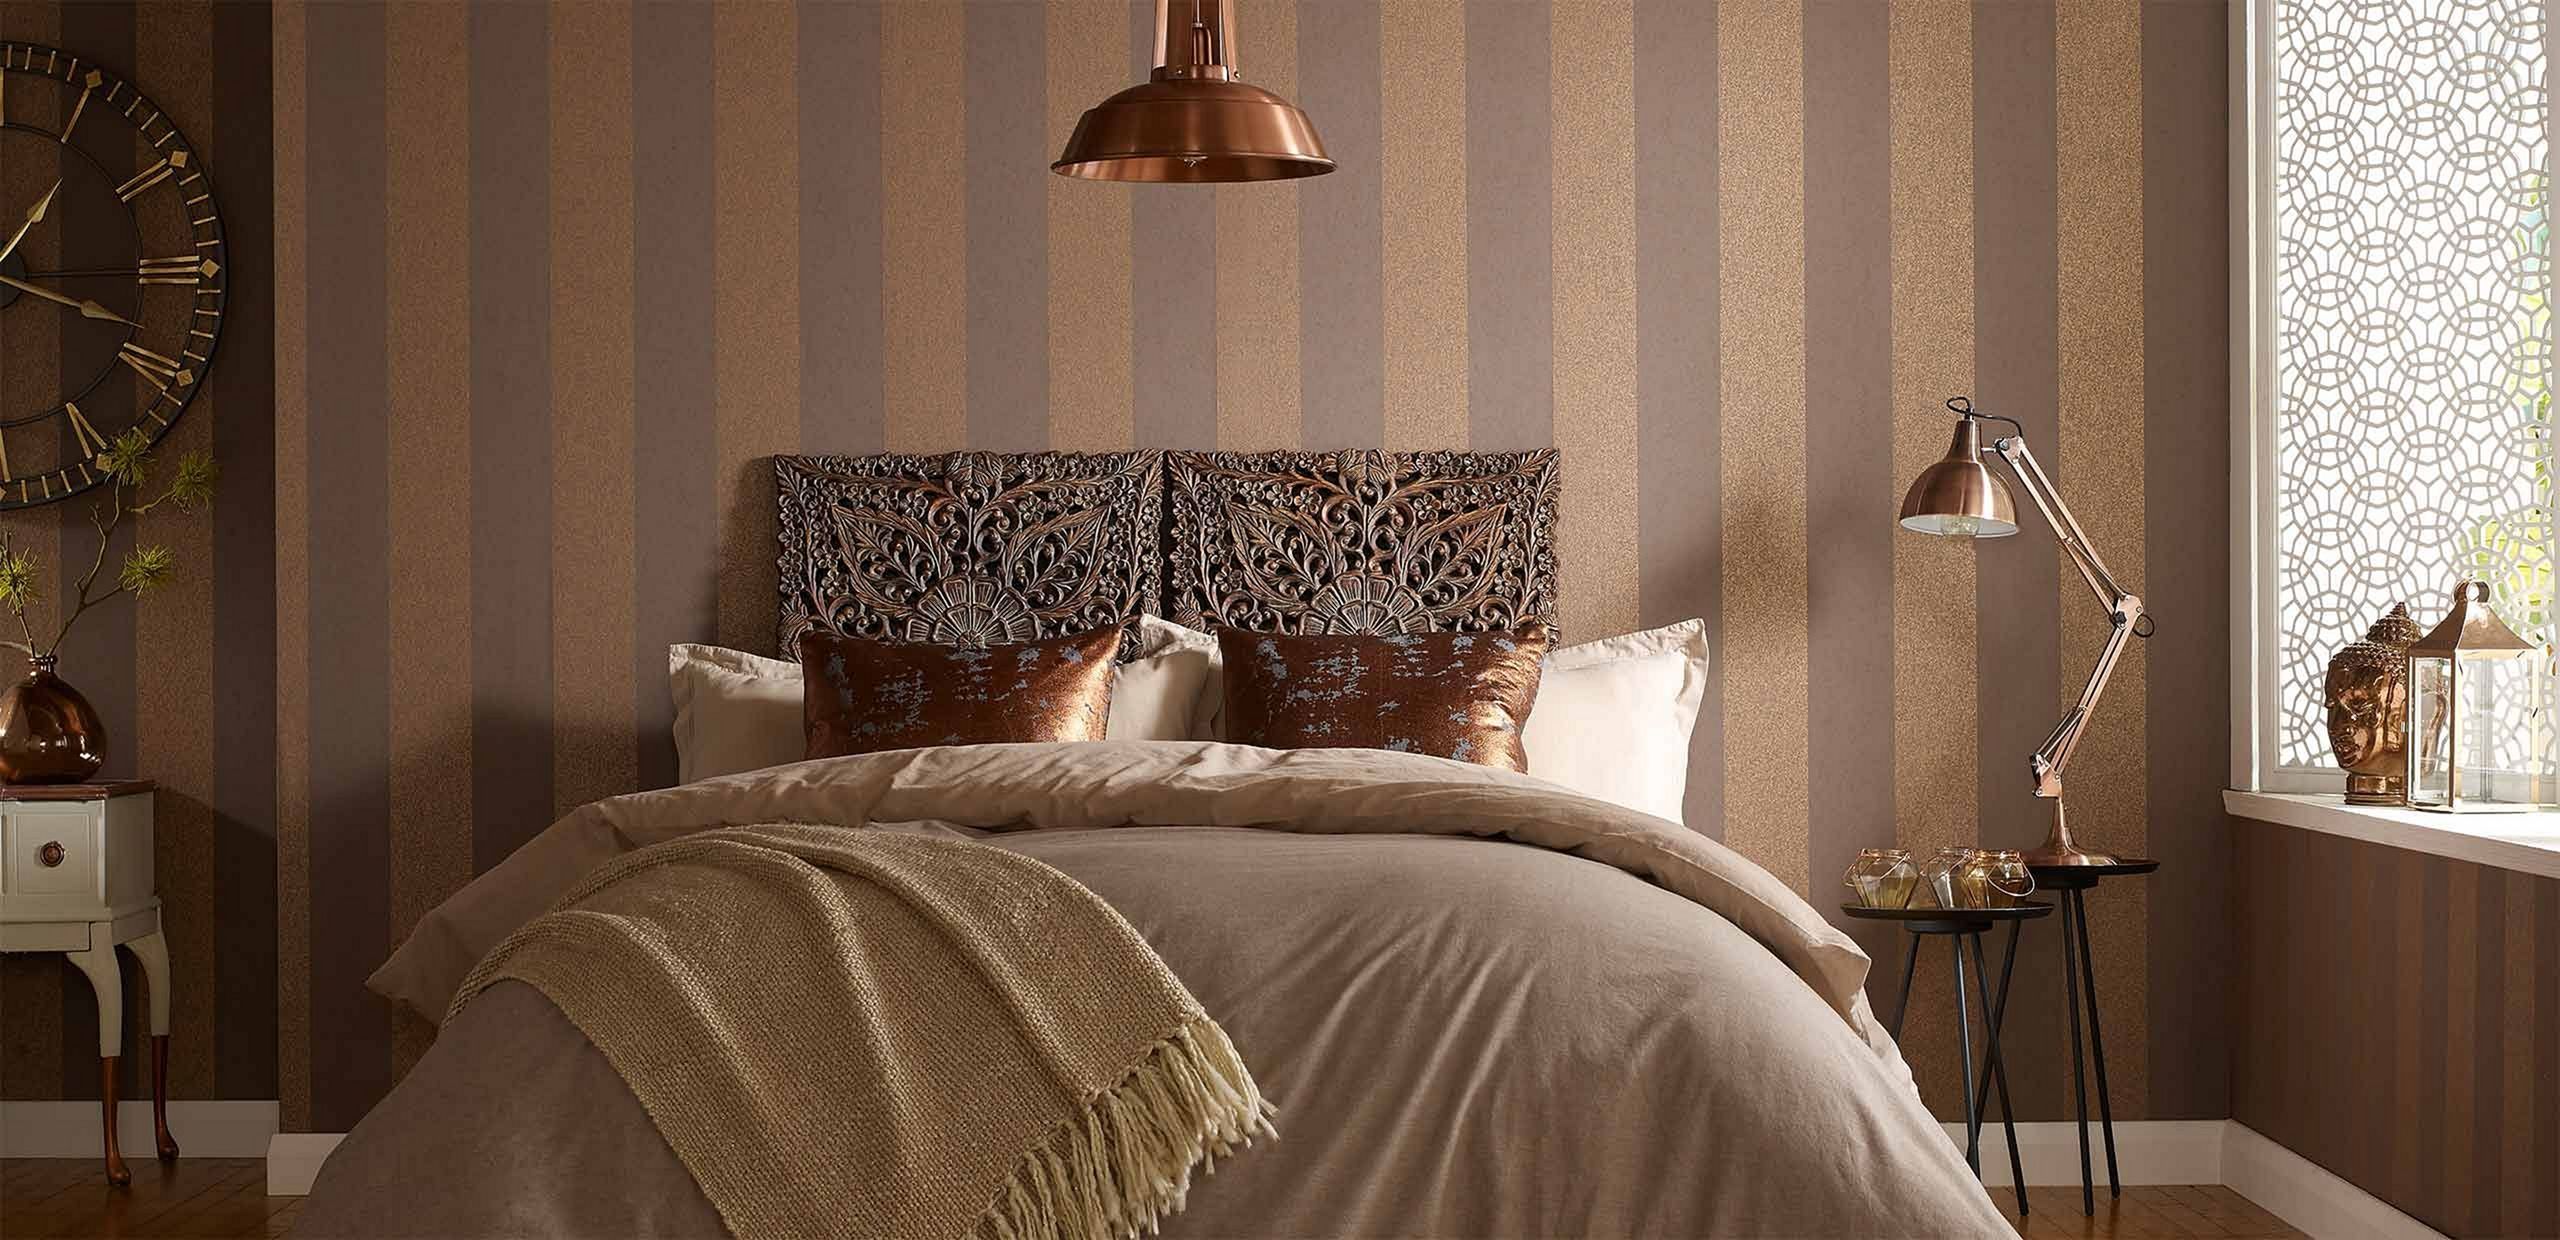 Budget Friendly Elegance: Affordable Bedroom Wallpaper Ideas For Style